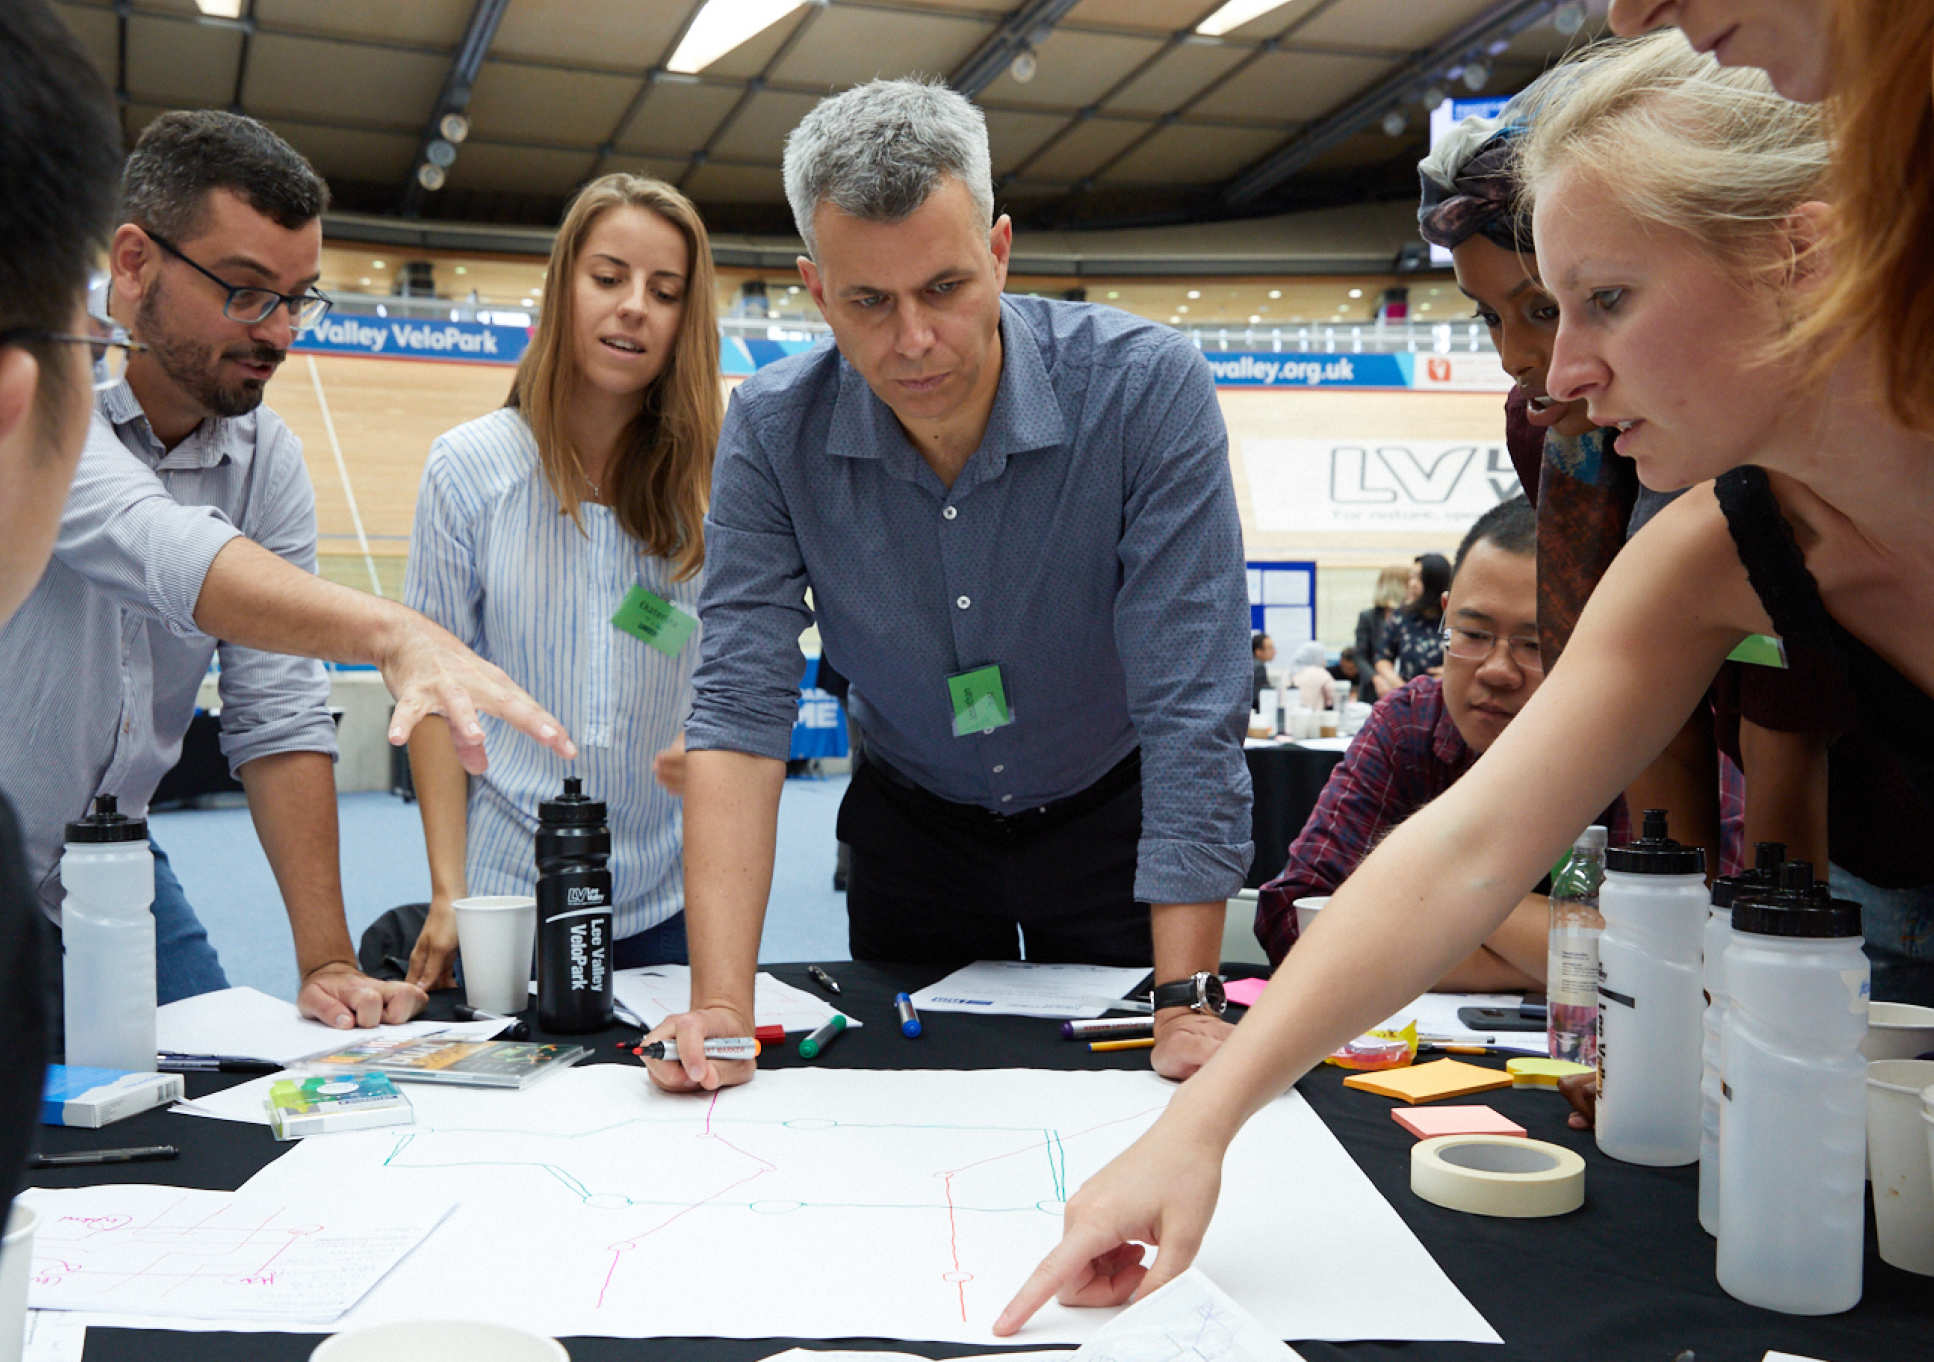 The teams discussed global challenges facing cities in the future